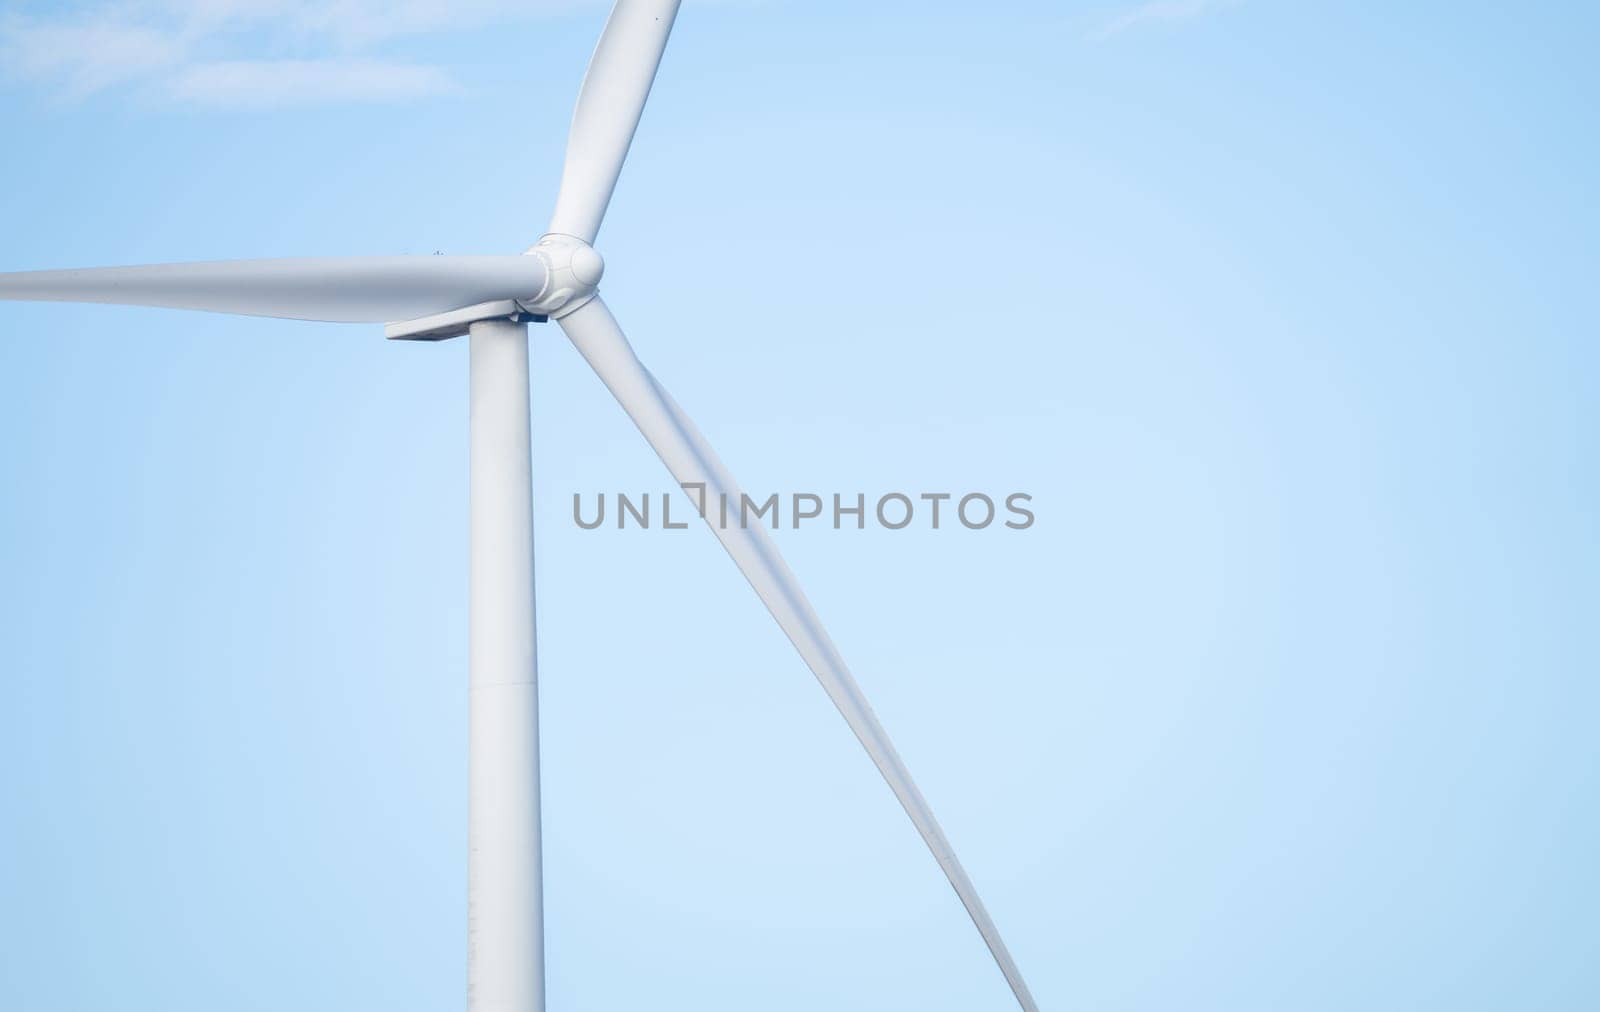 Wind energy. Wind power. Sustainable, renewable energy. Wind turbines generate electricity. Wind farm. Sustainable resources. Sustainable development. Green technology for energy sustainability.